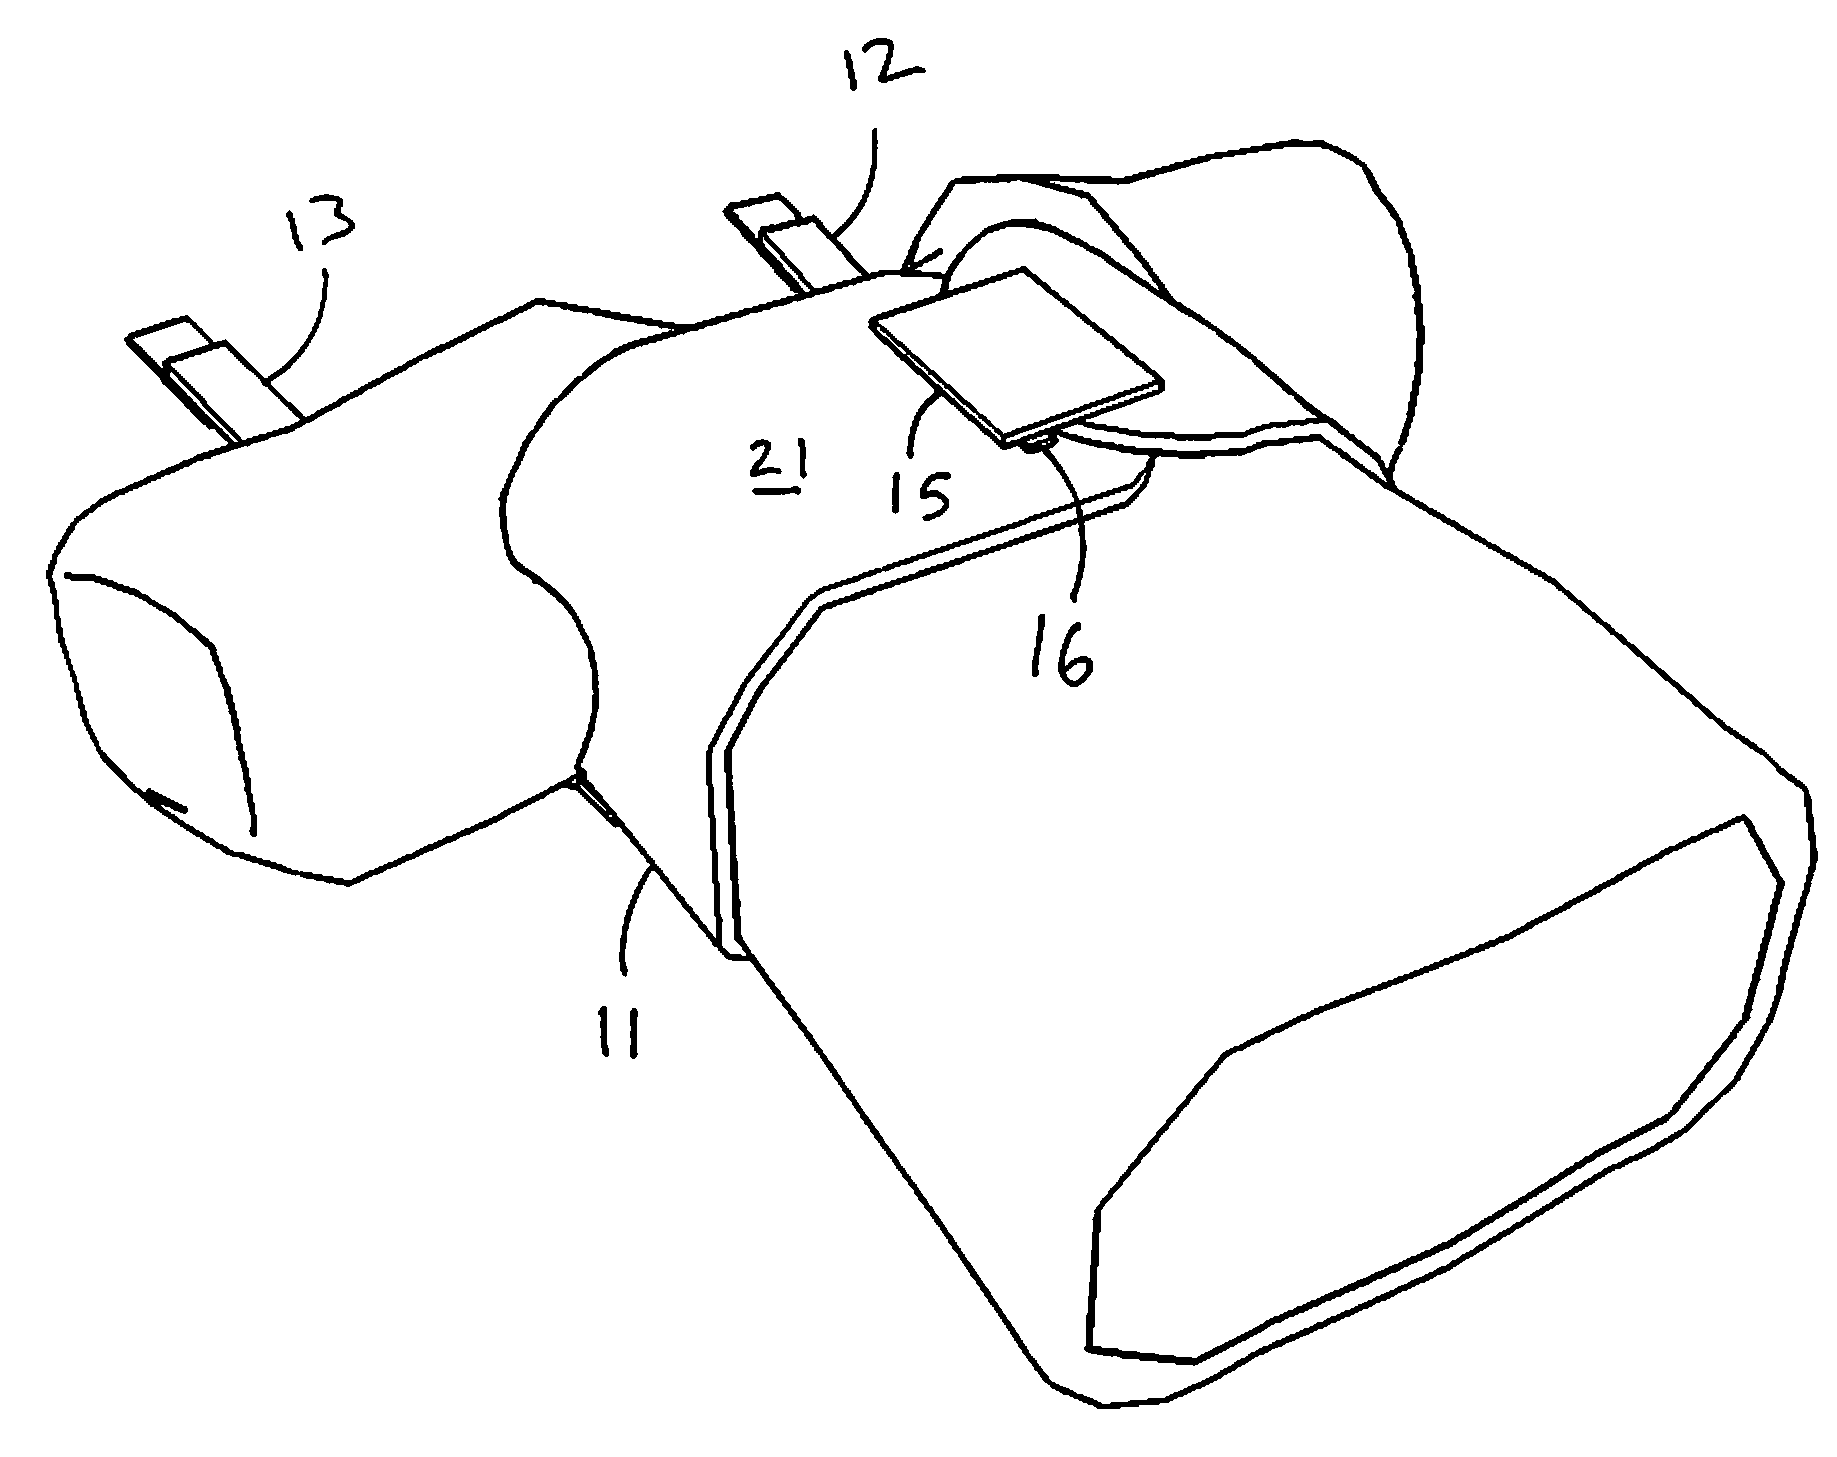 Device and Methods for Accessory Chest Muscle Development